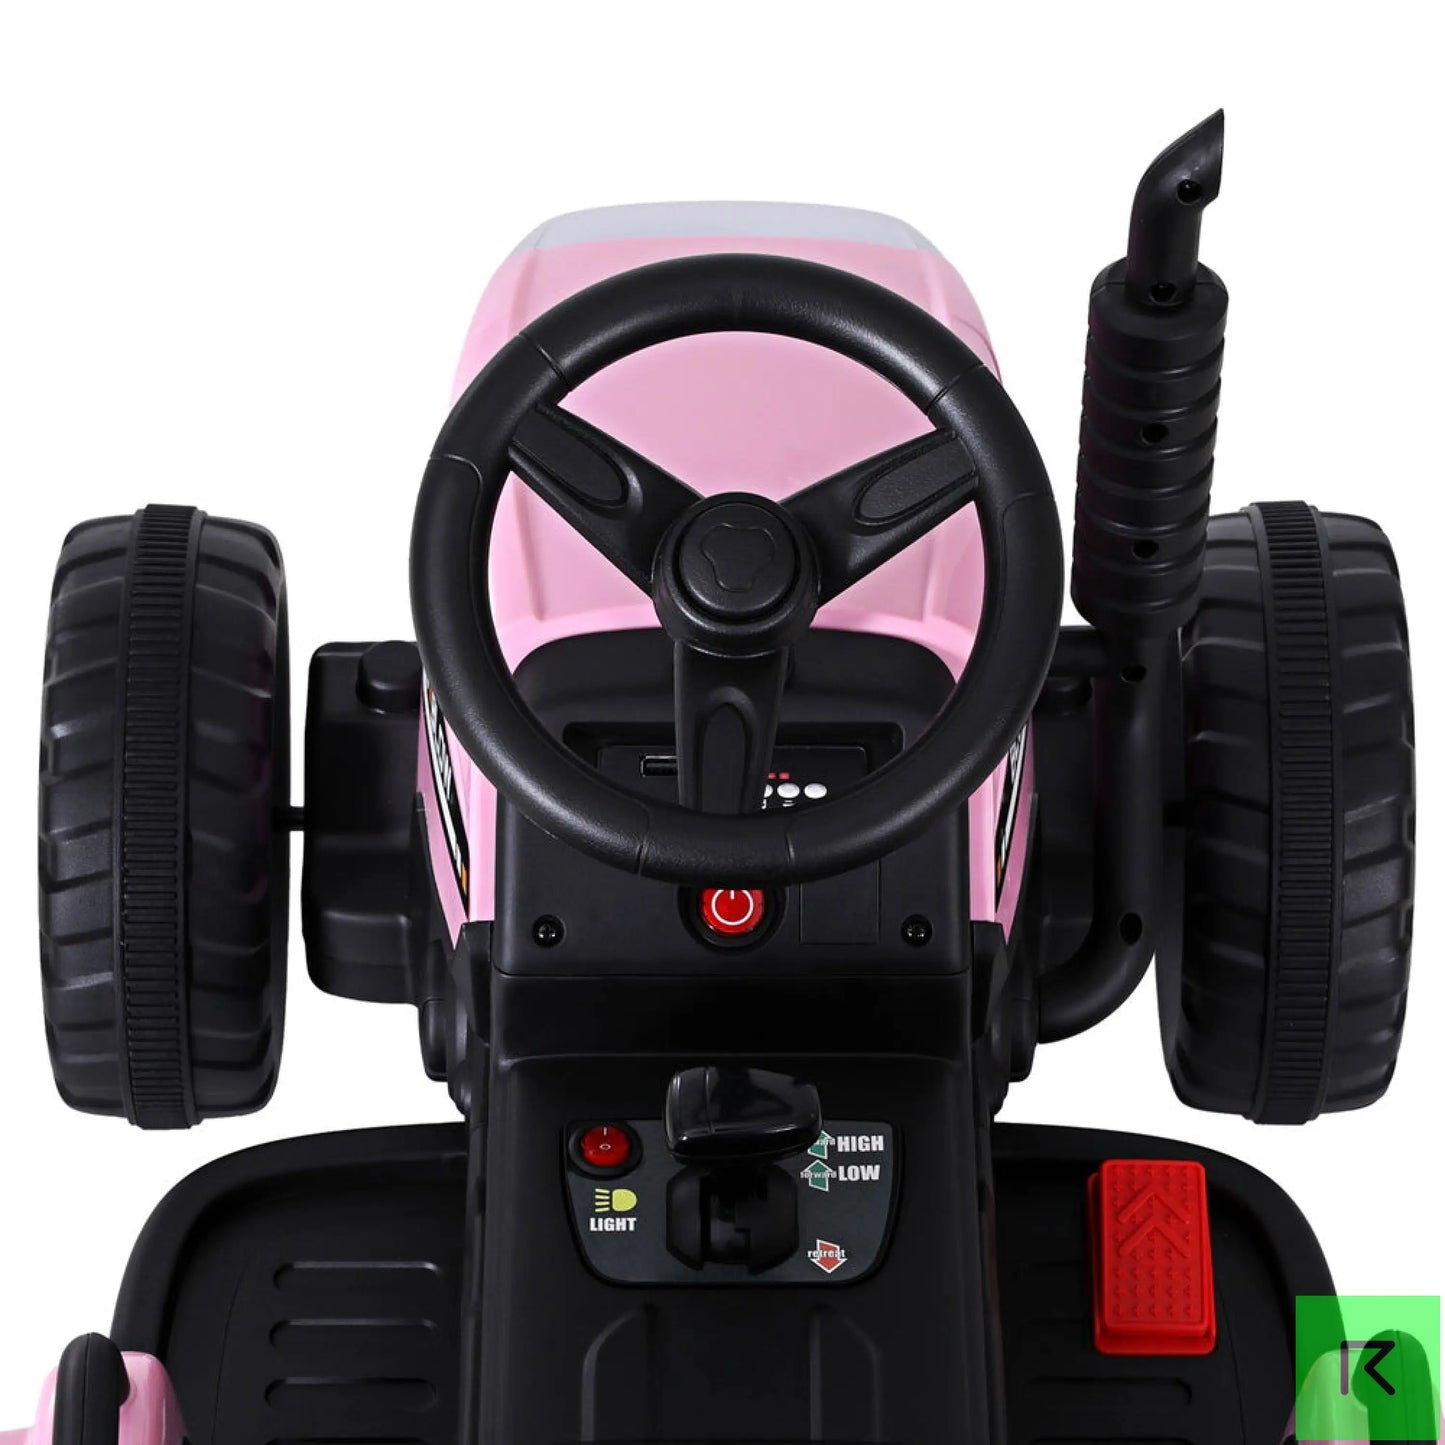 Tracka Pink Kids Ride On Tractor - Kids tractor